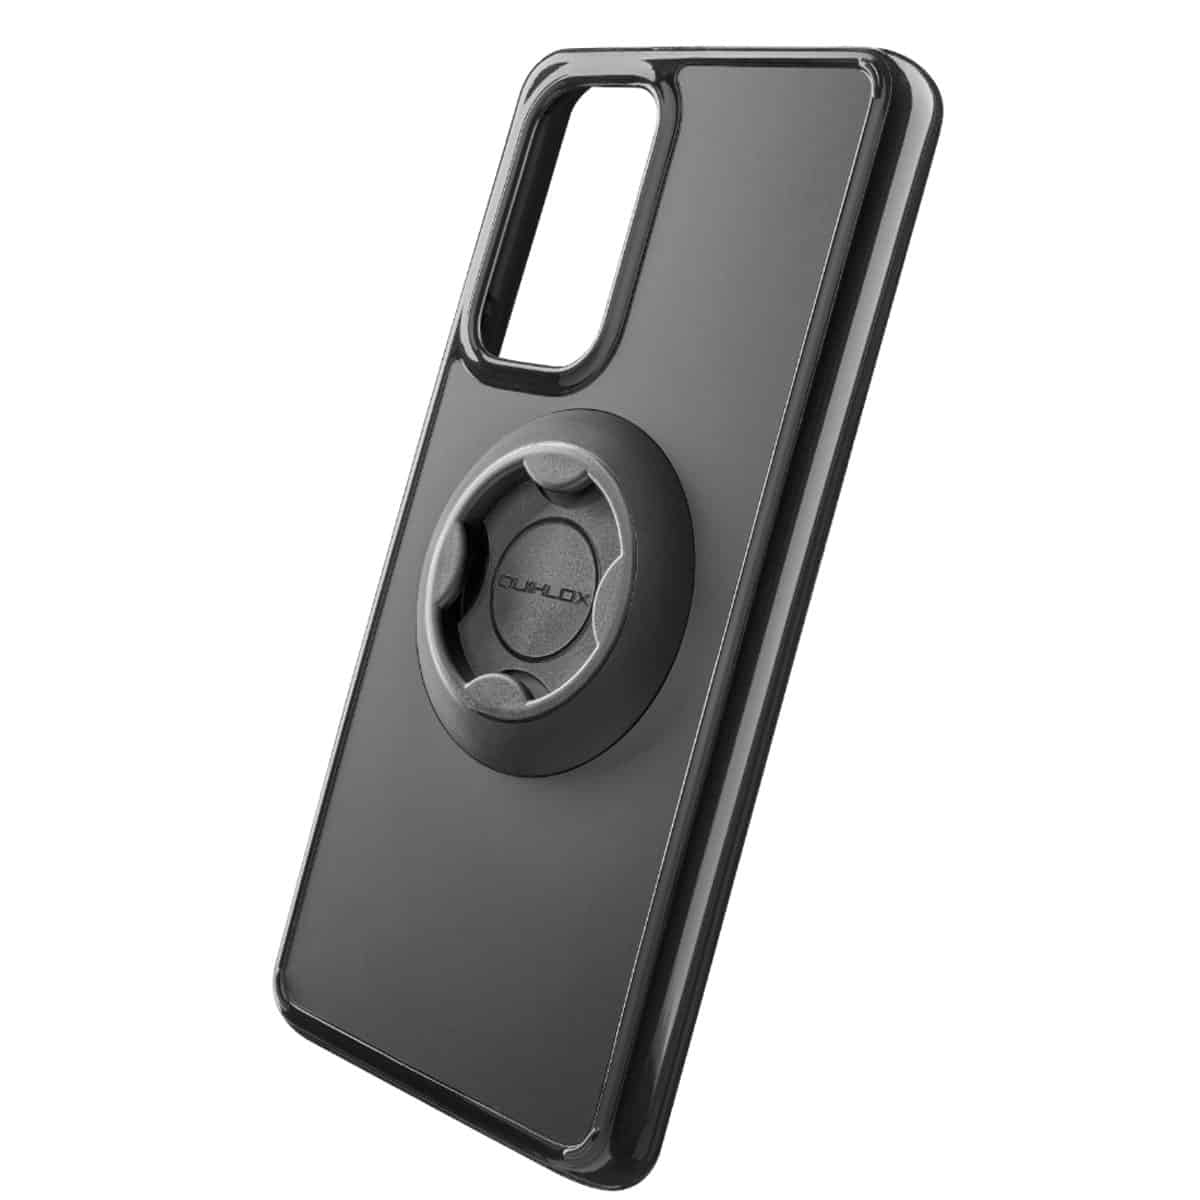 The Quiklox Samsung A53 phone cases allow you to securely take your phone on the road. 